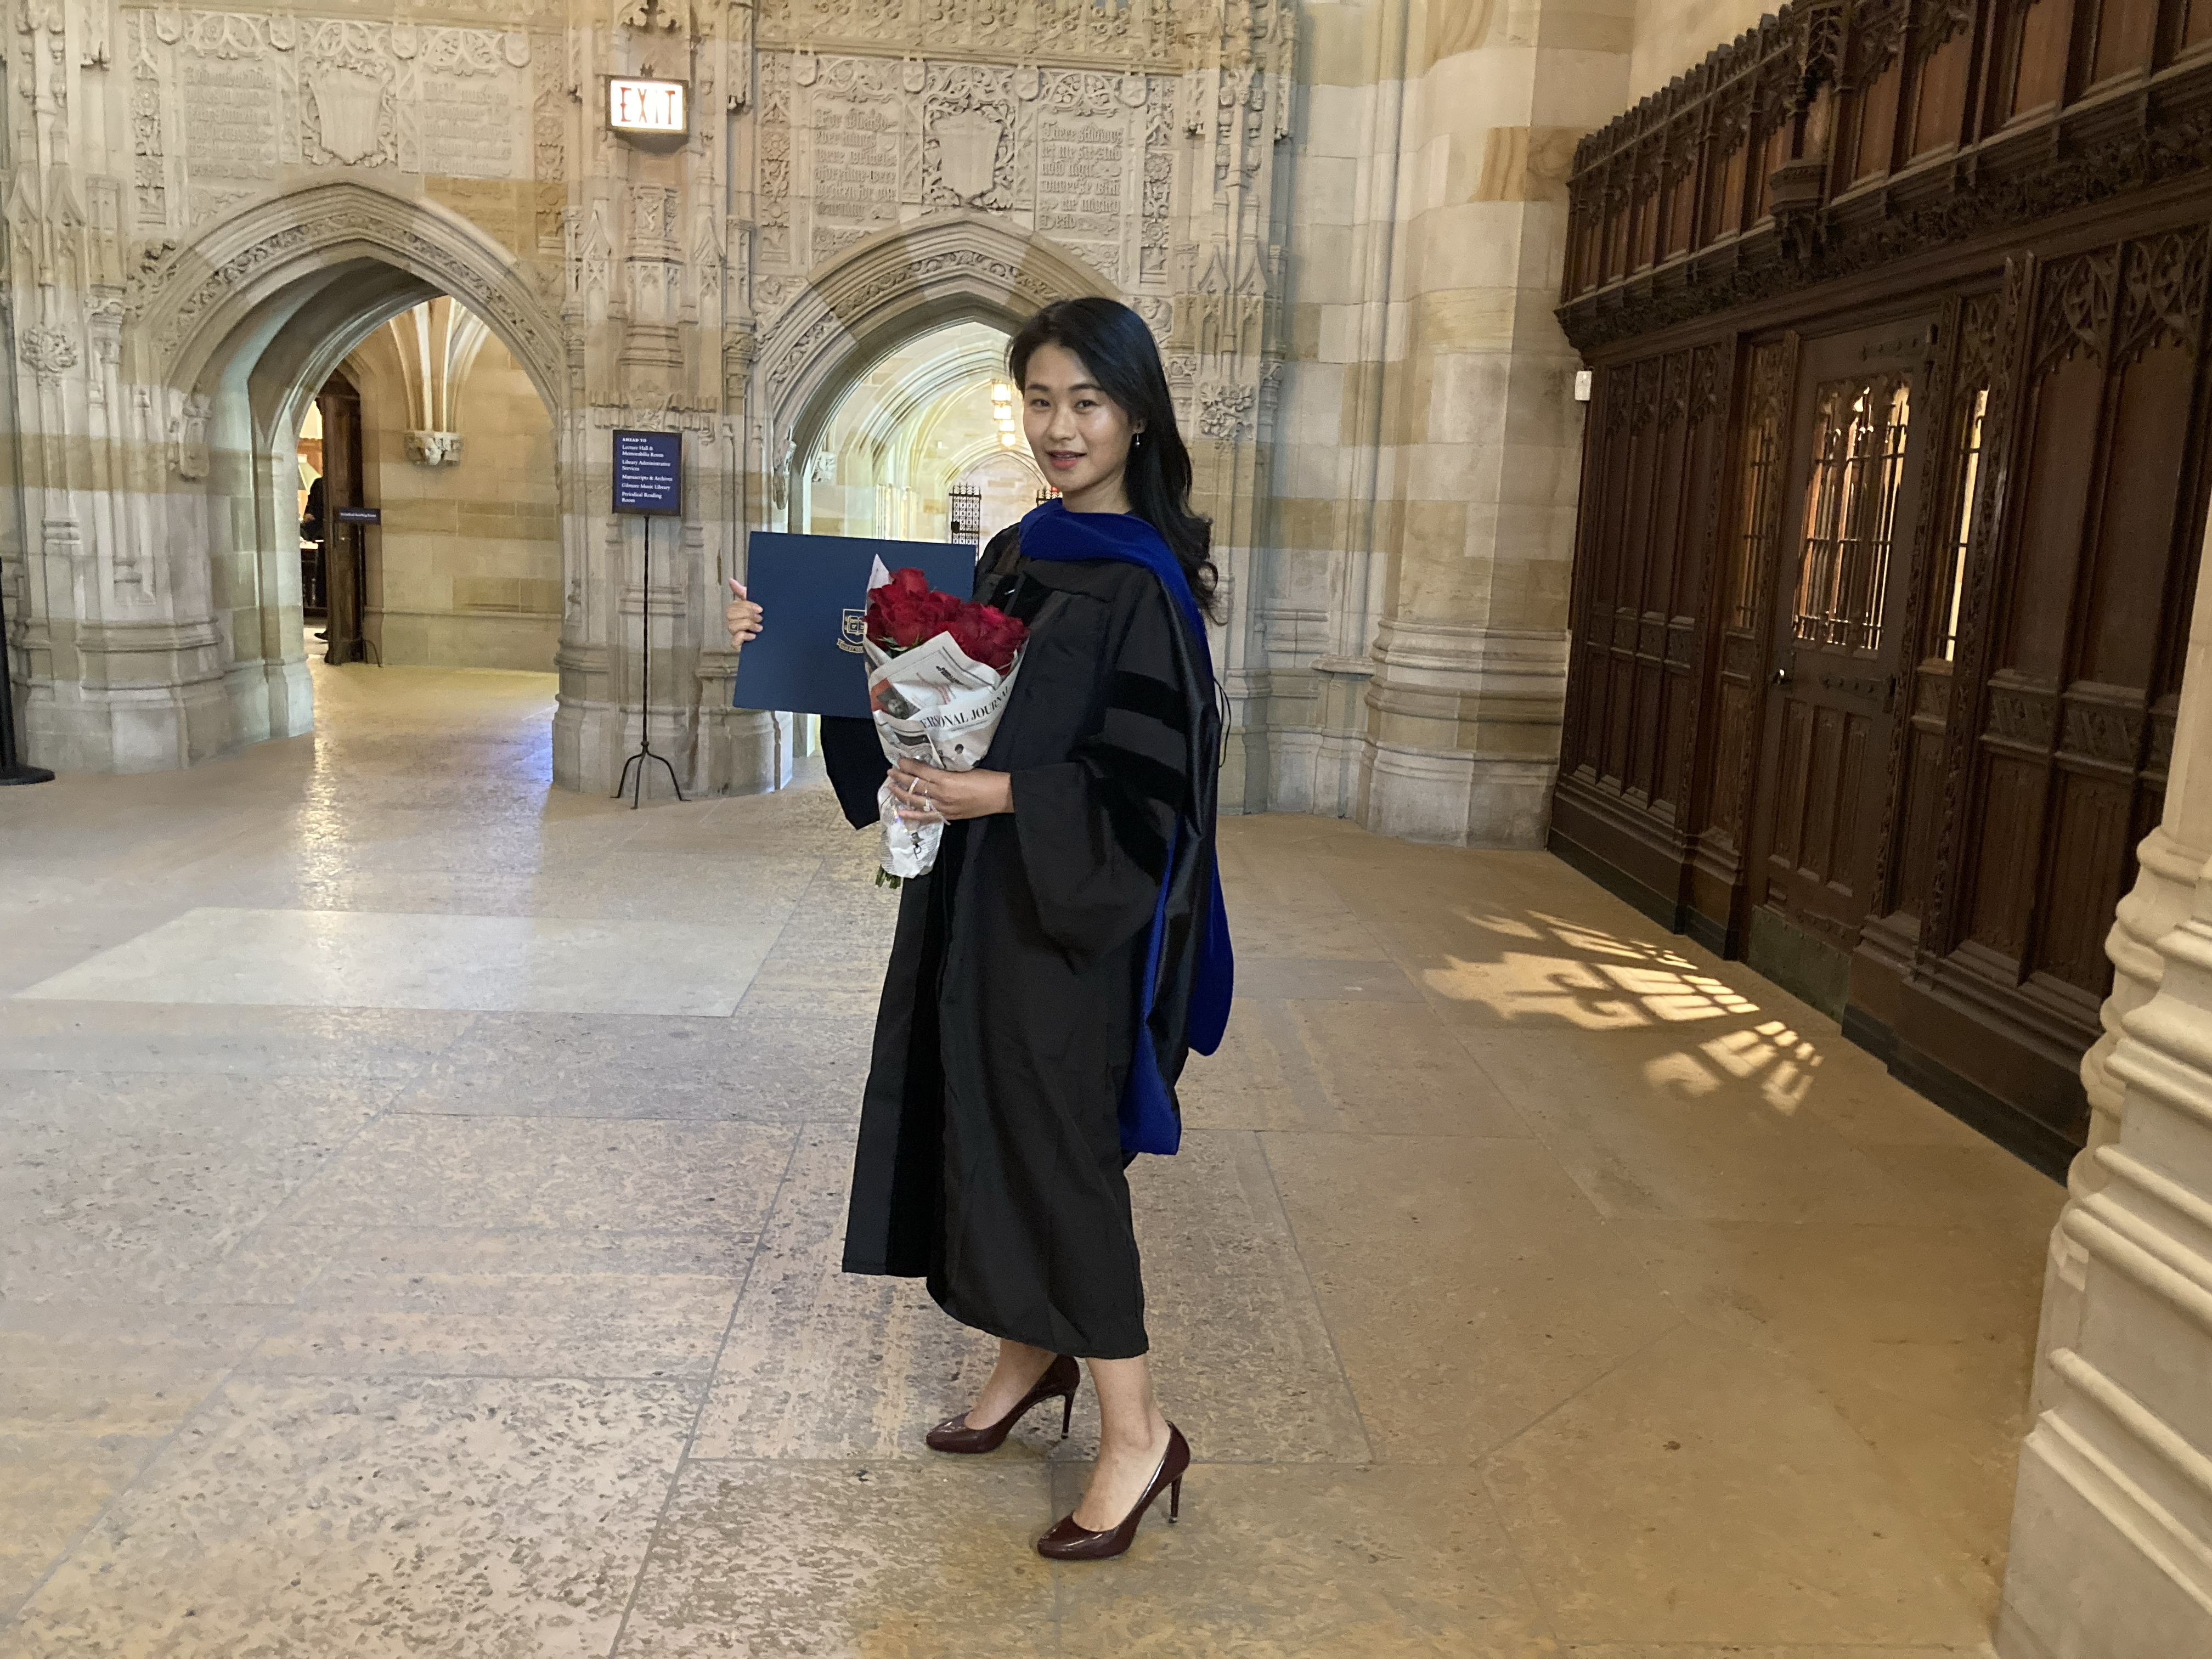 Tall female graduate with long black hair, wearing black high-heel pumps, holds bouquet of red roses wrapped in newspaper and holds her diploma folder. The archways to the exhibition corridor of Sterling Library are visible in the background.